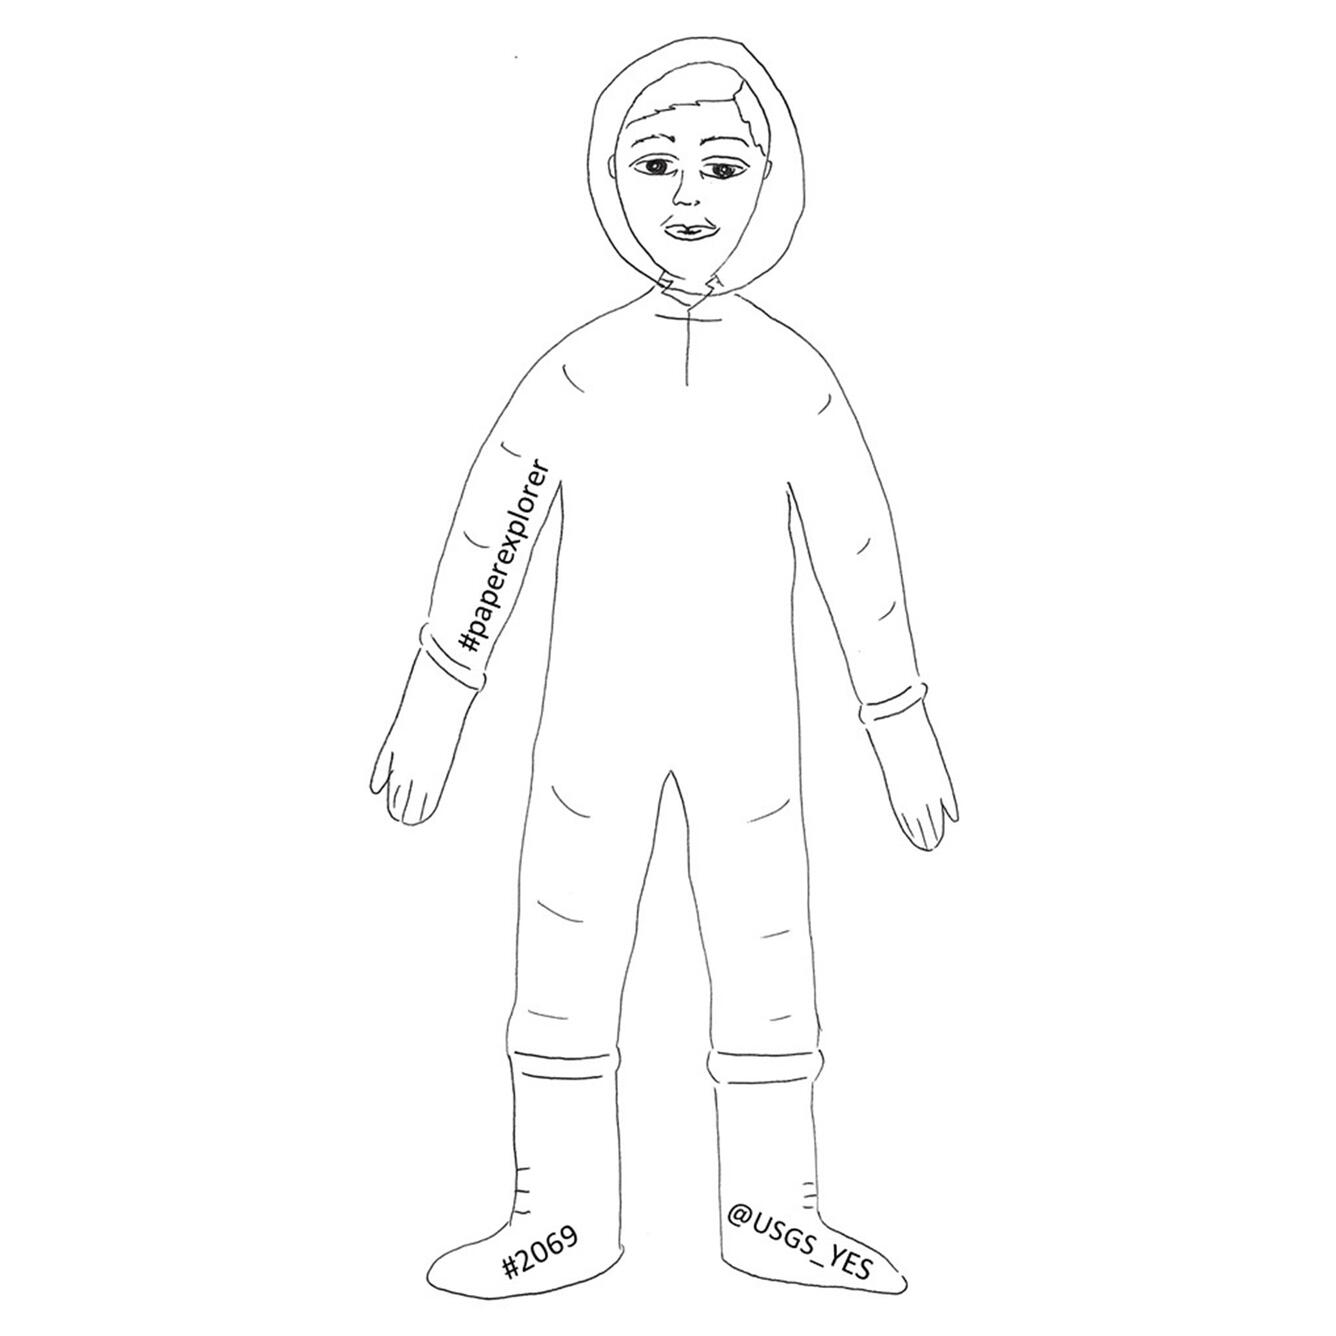 This image is a black-and-white pen sketch of a human wearing a clear helmet, boots, and gloves to represent a future explorer.